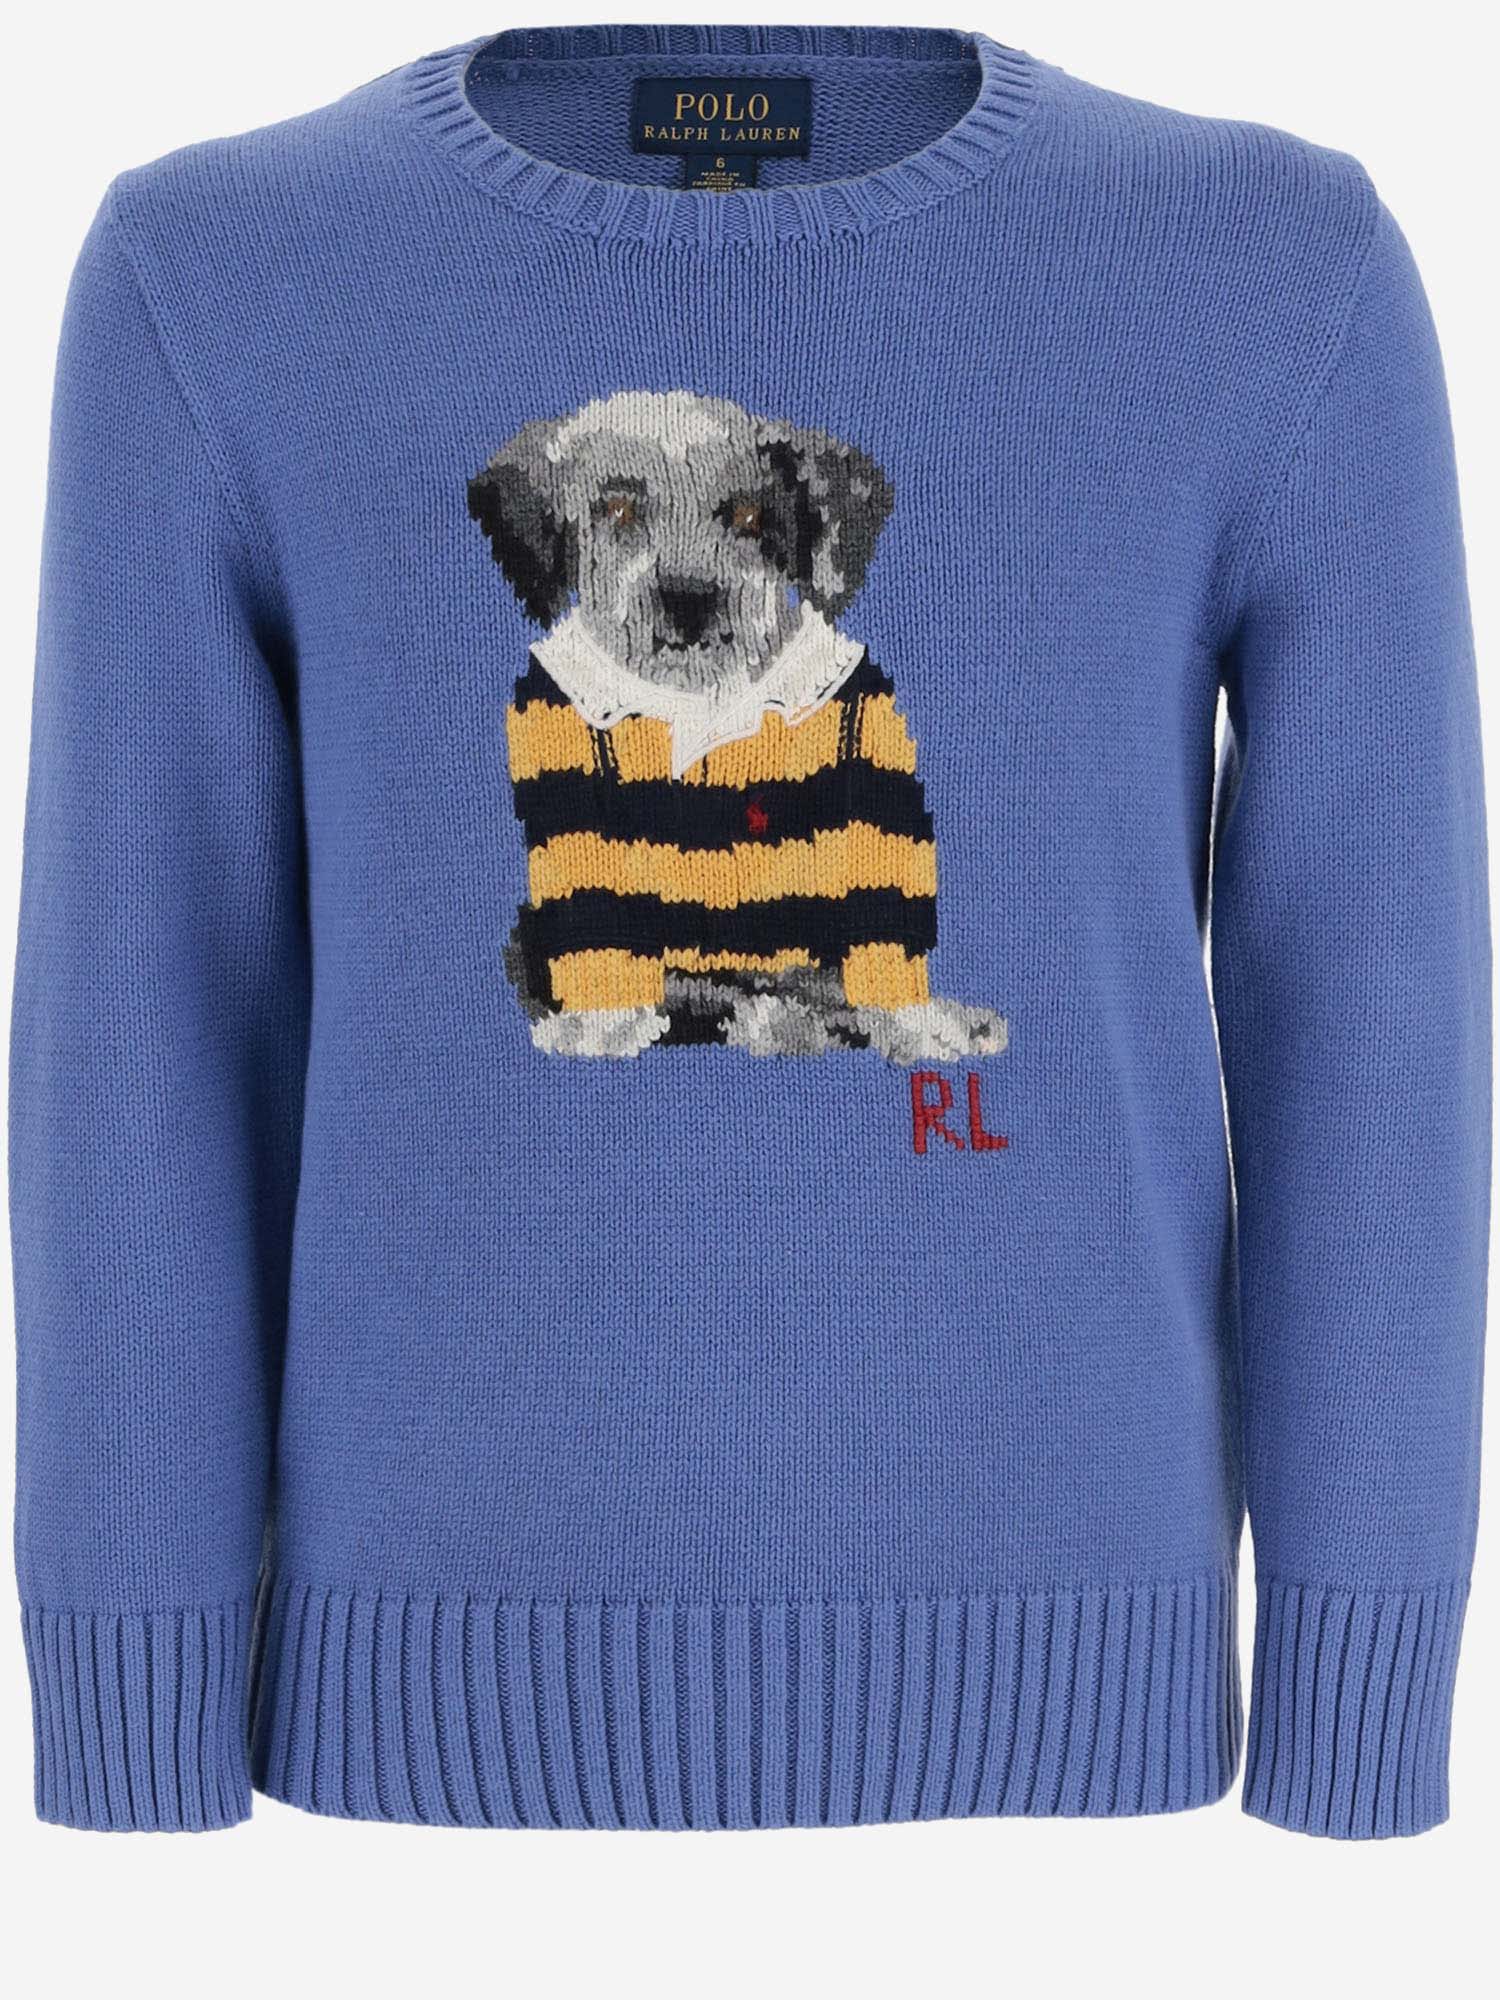 Polo Ralph Lauren Kids' Cotton Sweater With Little Dog In Blue